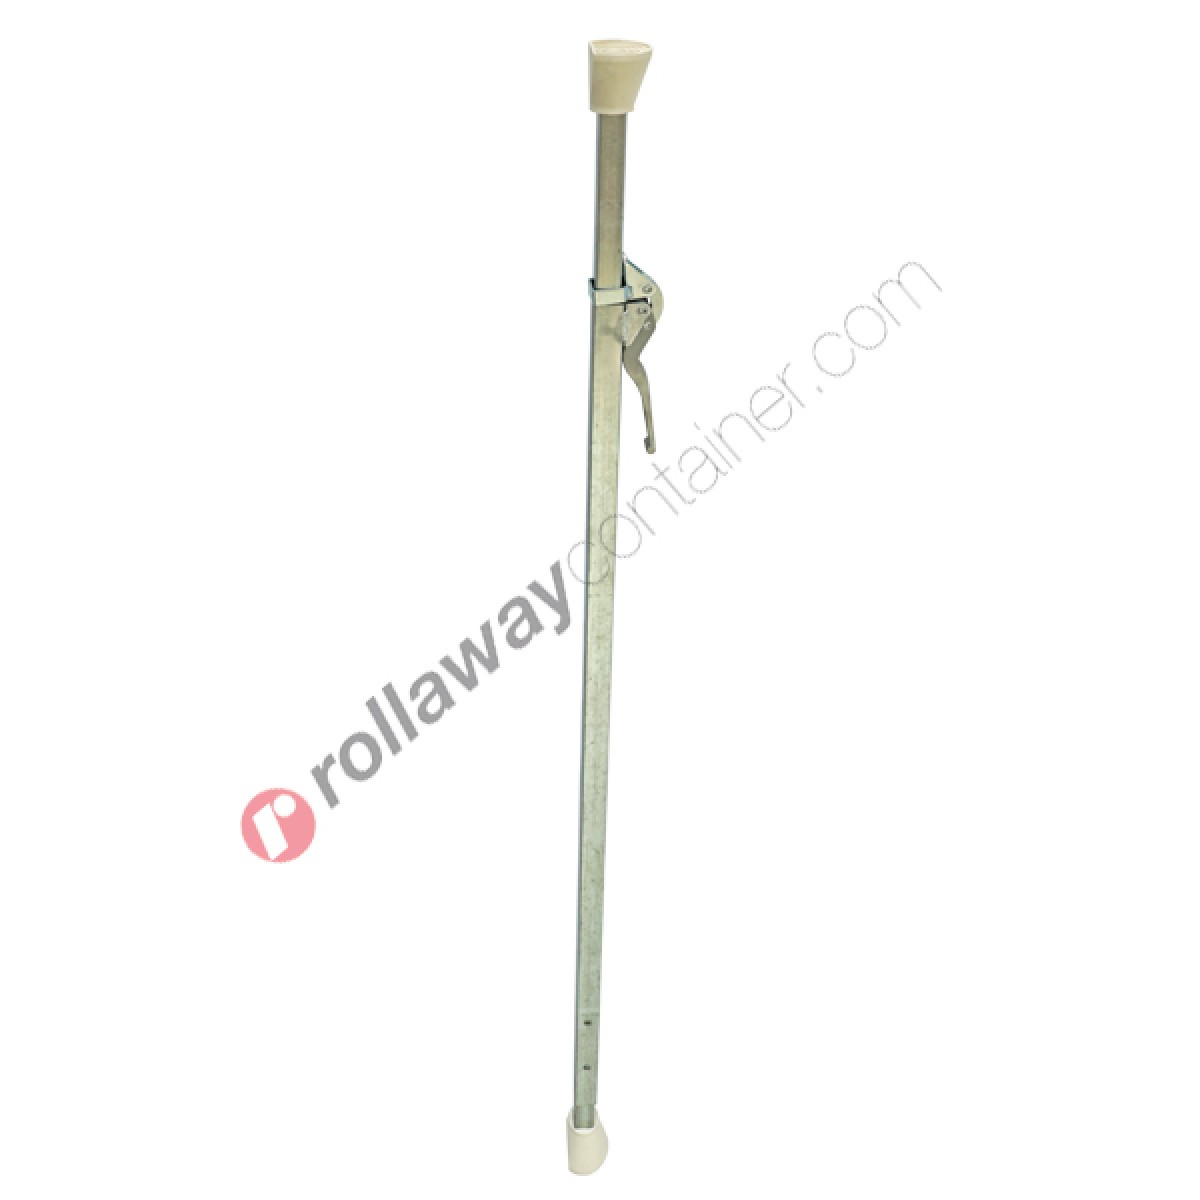 Load bar telescopic square in zinc-plated steel from 1.88 m to 2.86 m Zinc Plated Telescoping Square Tubes